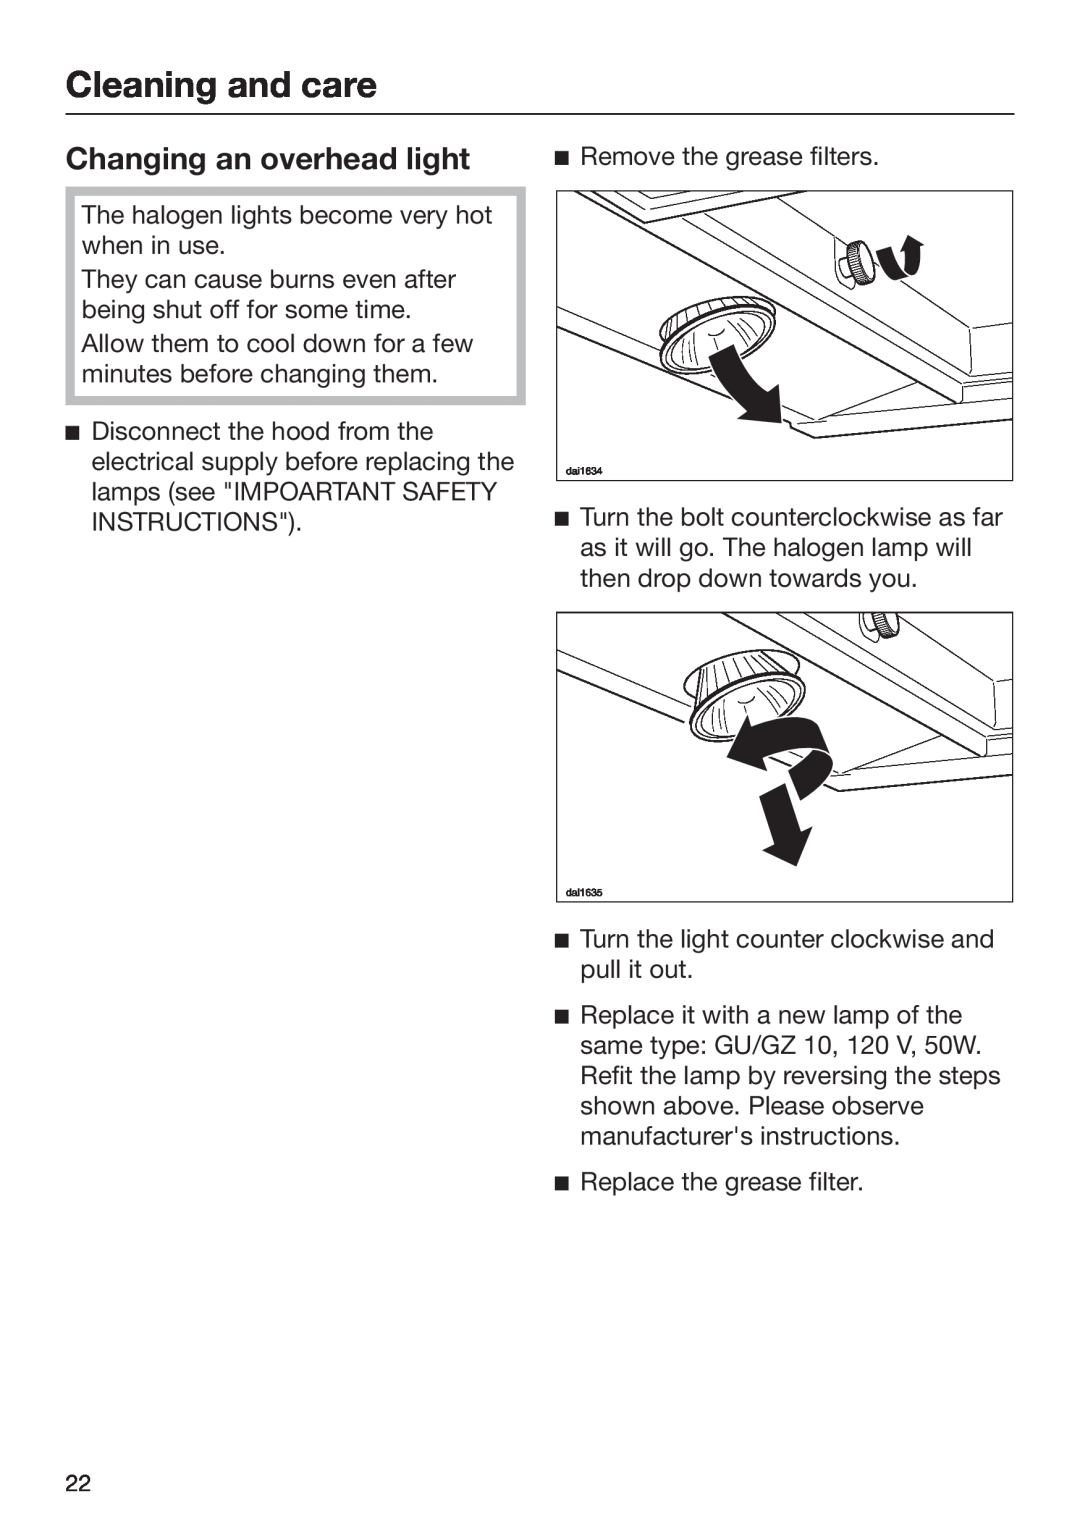 Miele 09 968 240 installation instructions Changing an overhead light, Cleaning and care 